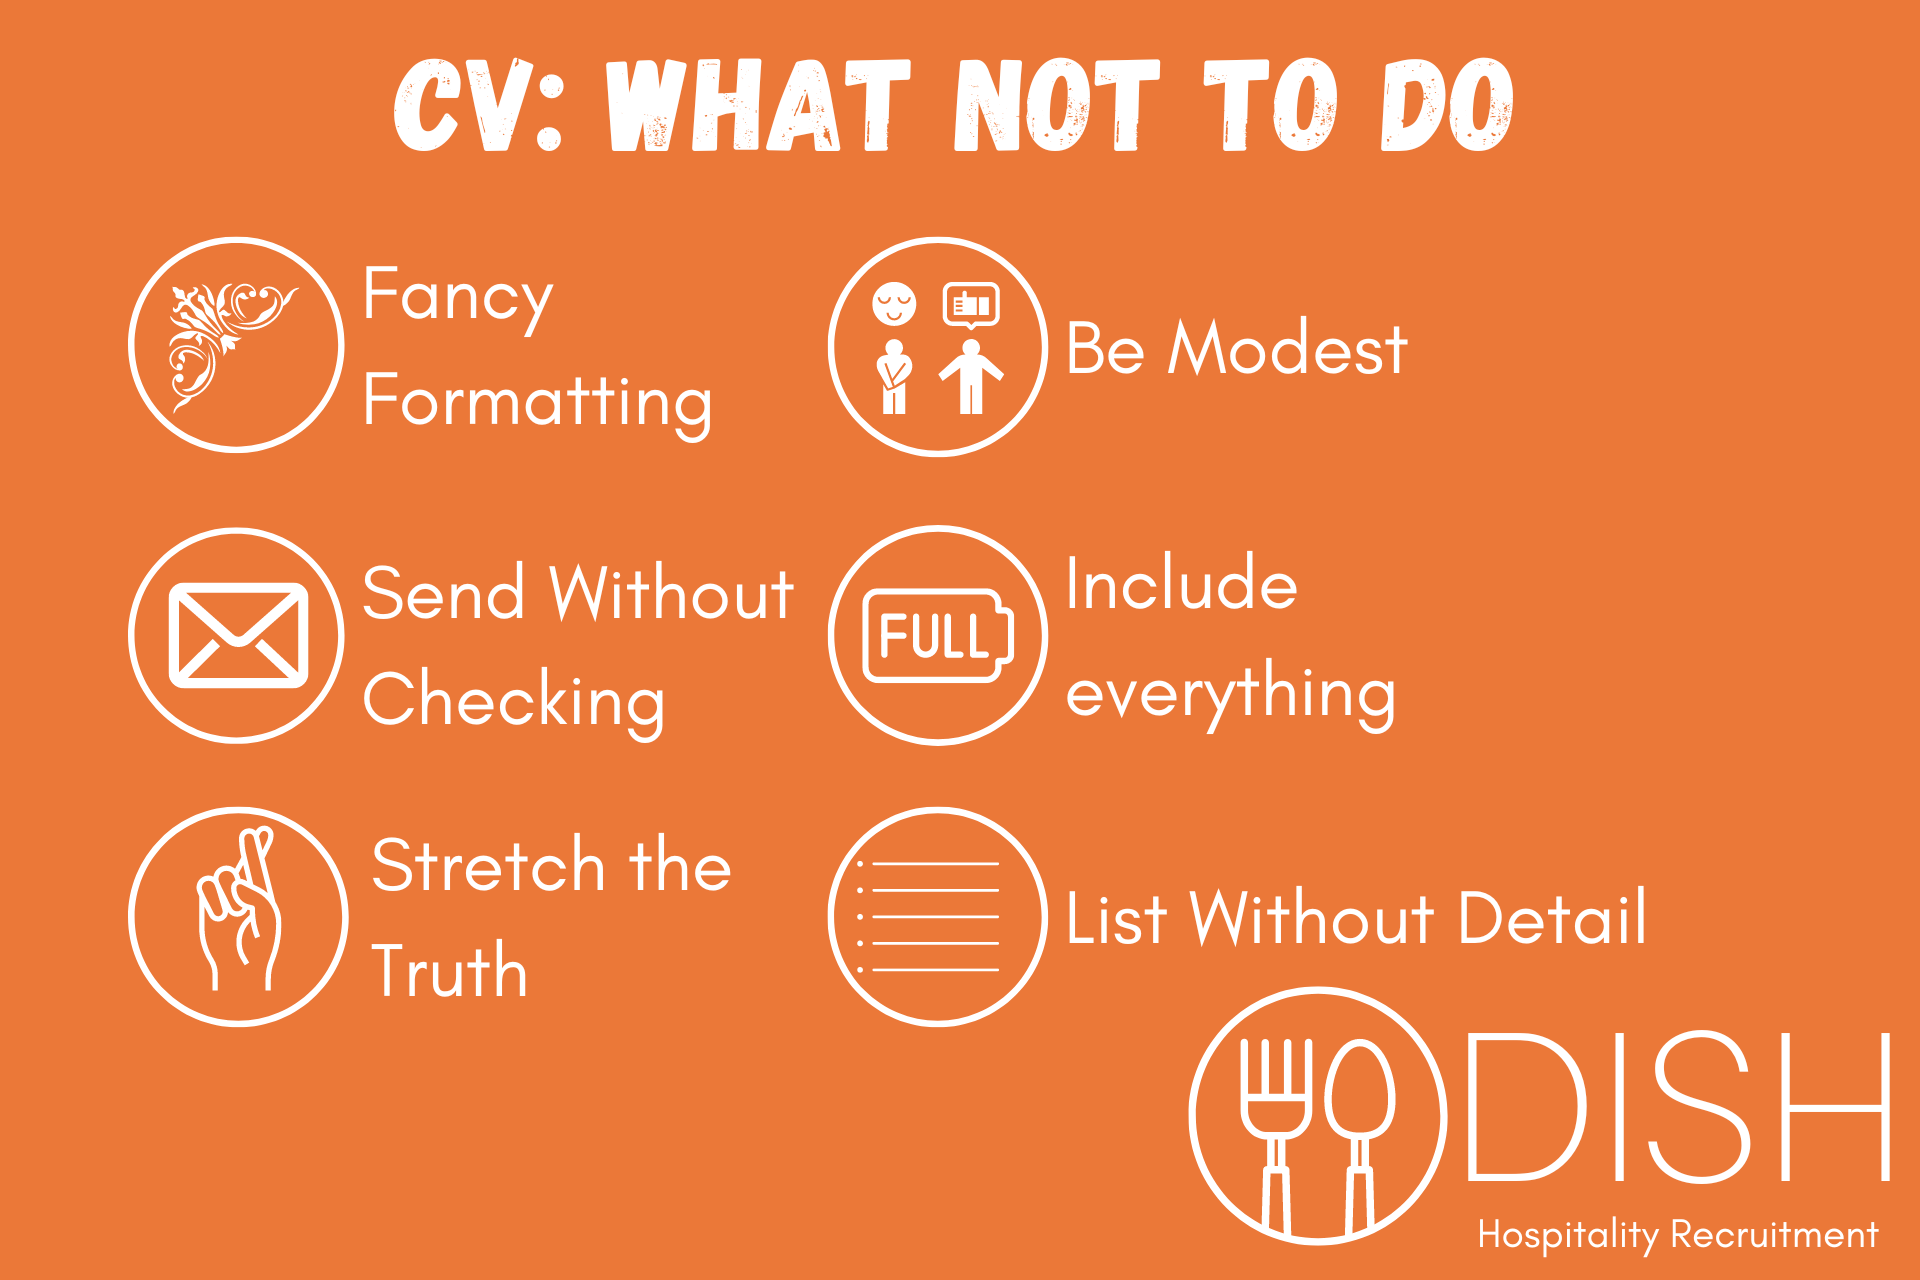 6 Mistakes Candidates Make When Writing CVs